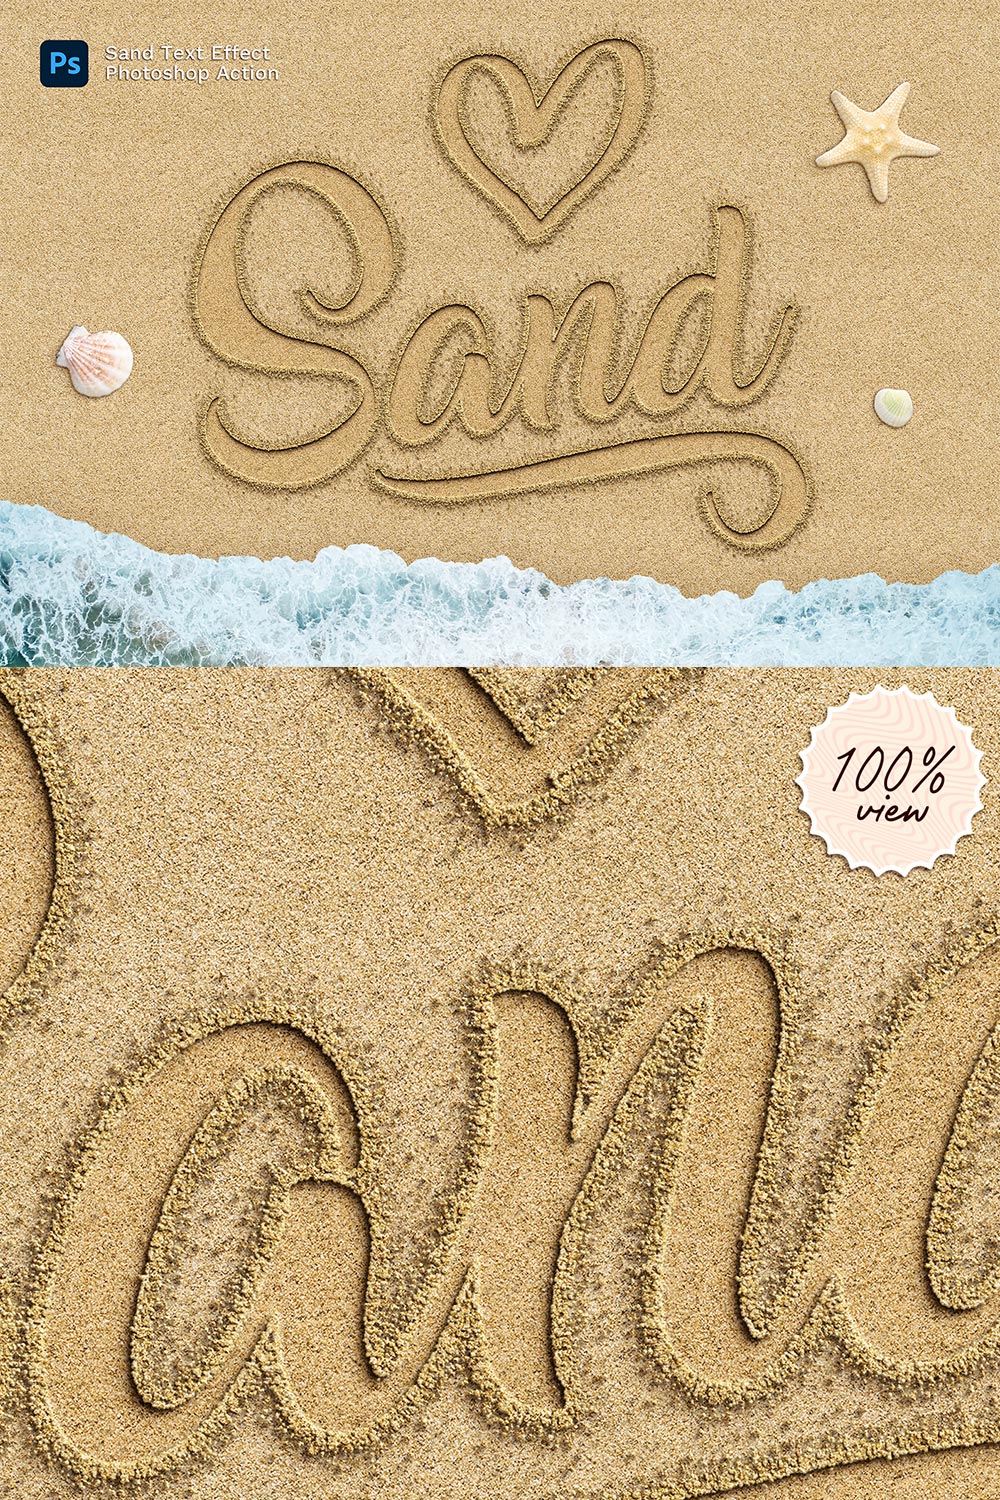 Sand Effect Photoshop Action pinterest preview image.